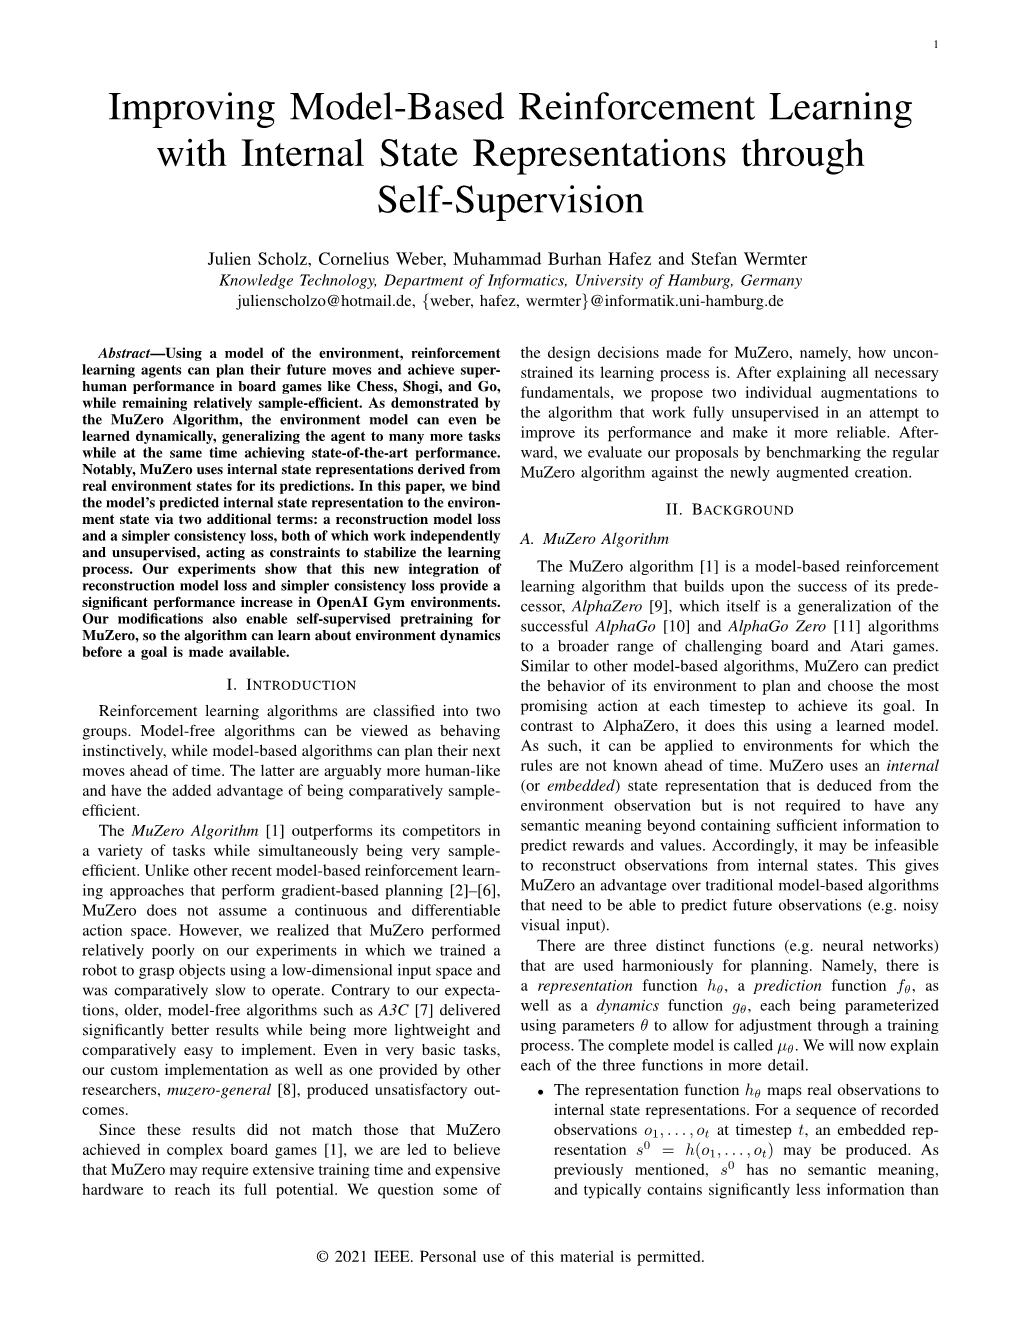 Improving Model-Based Reinforcement Learning with Internal State Representations Through Self-Supervision